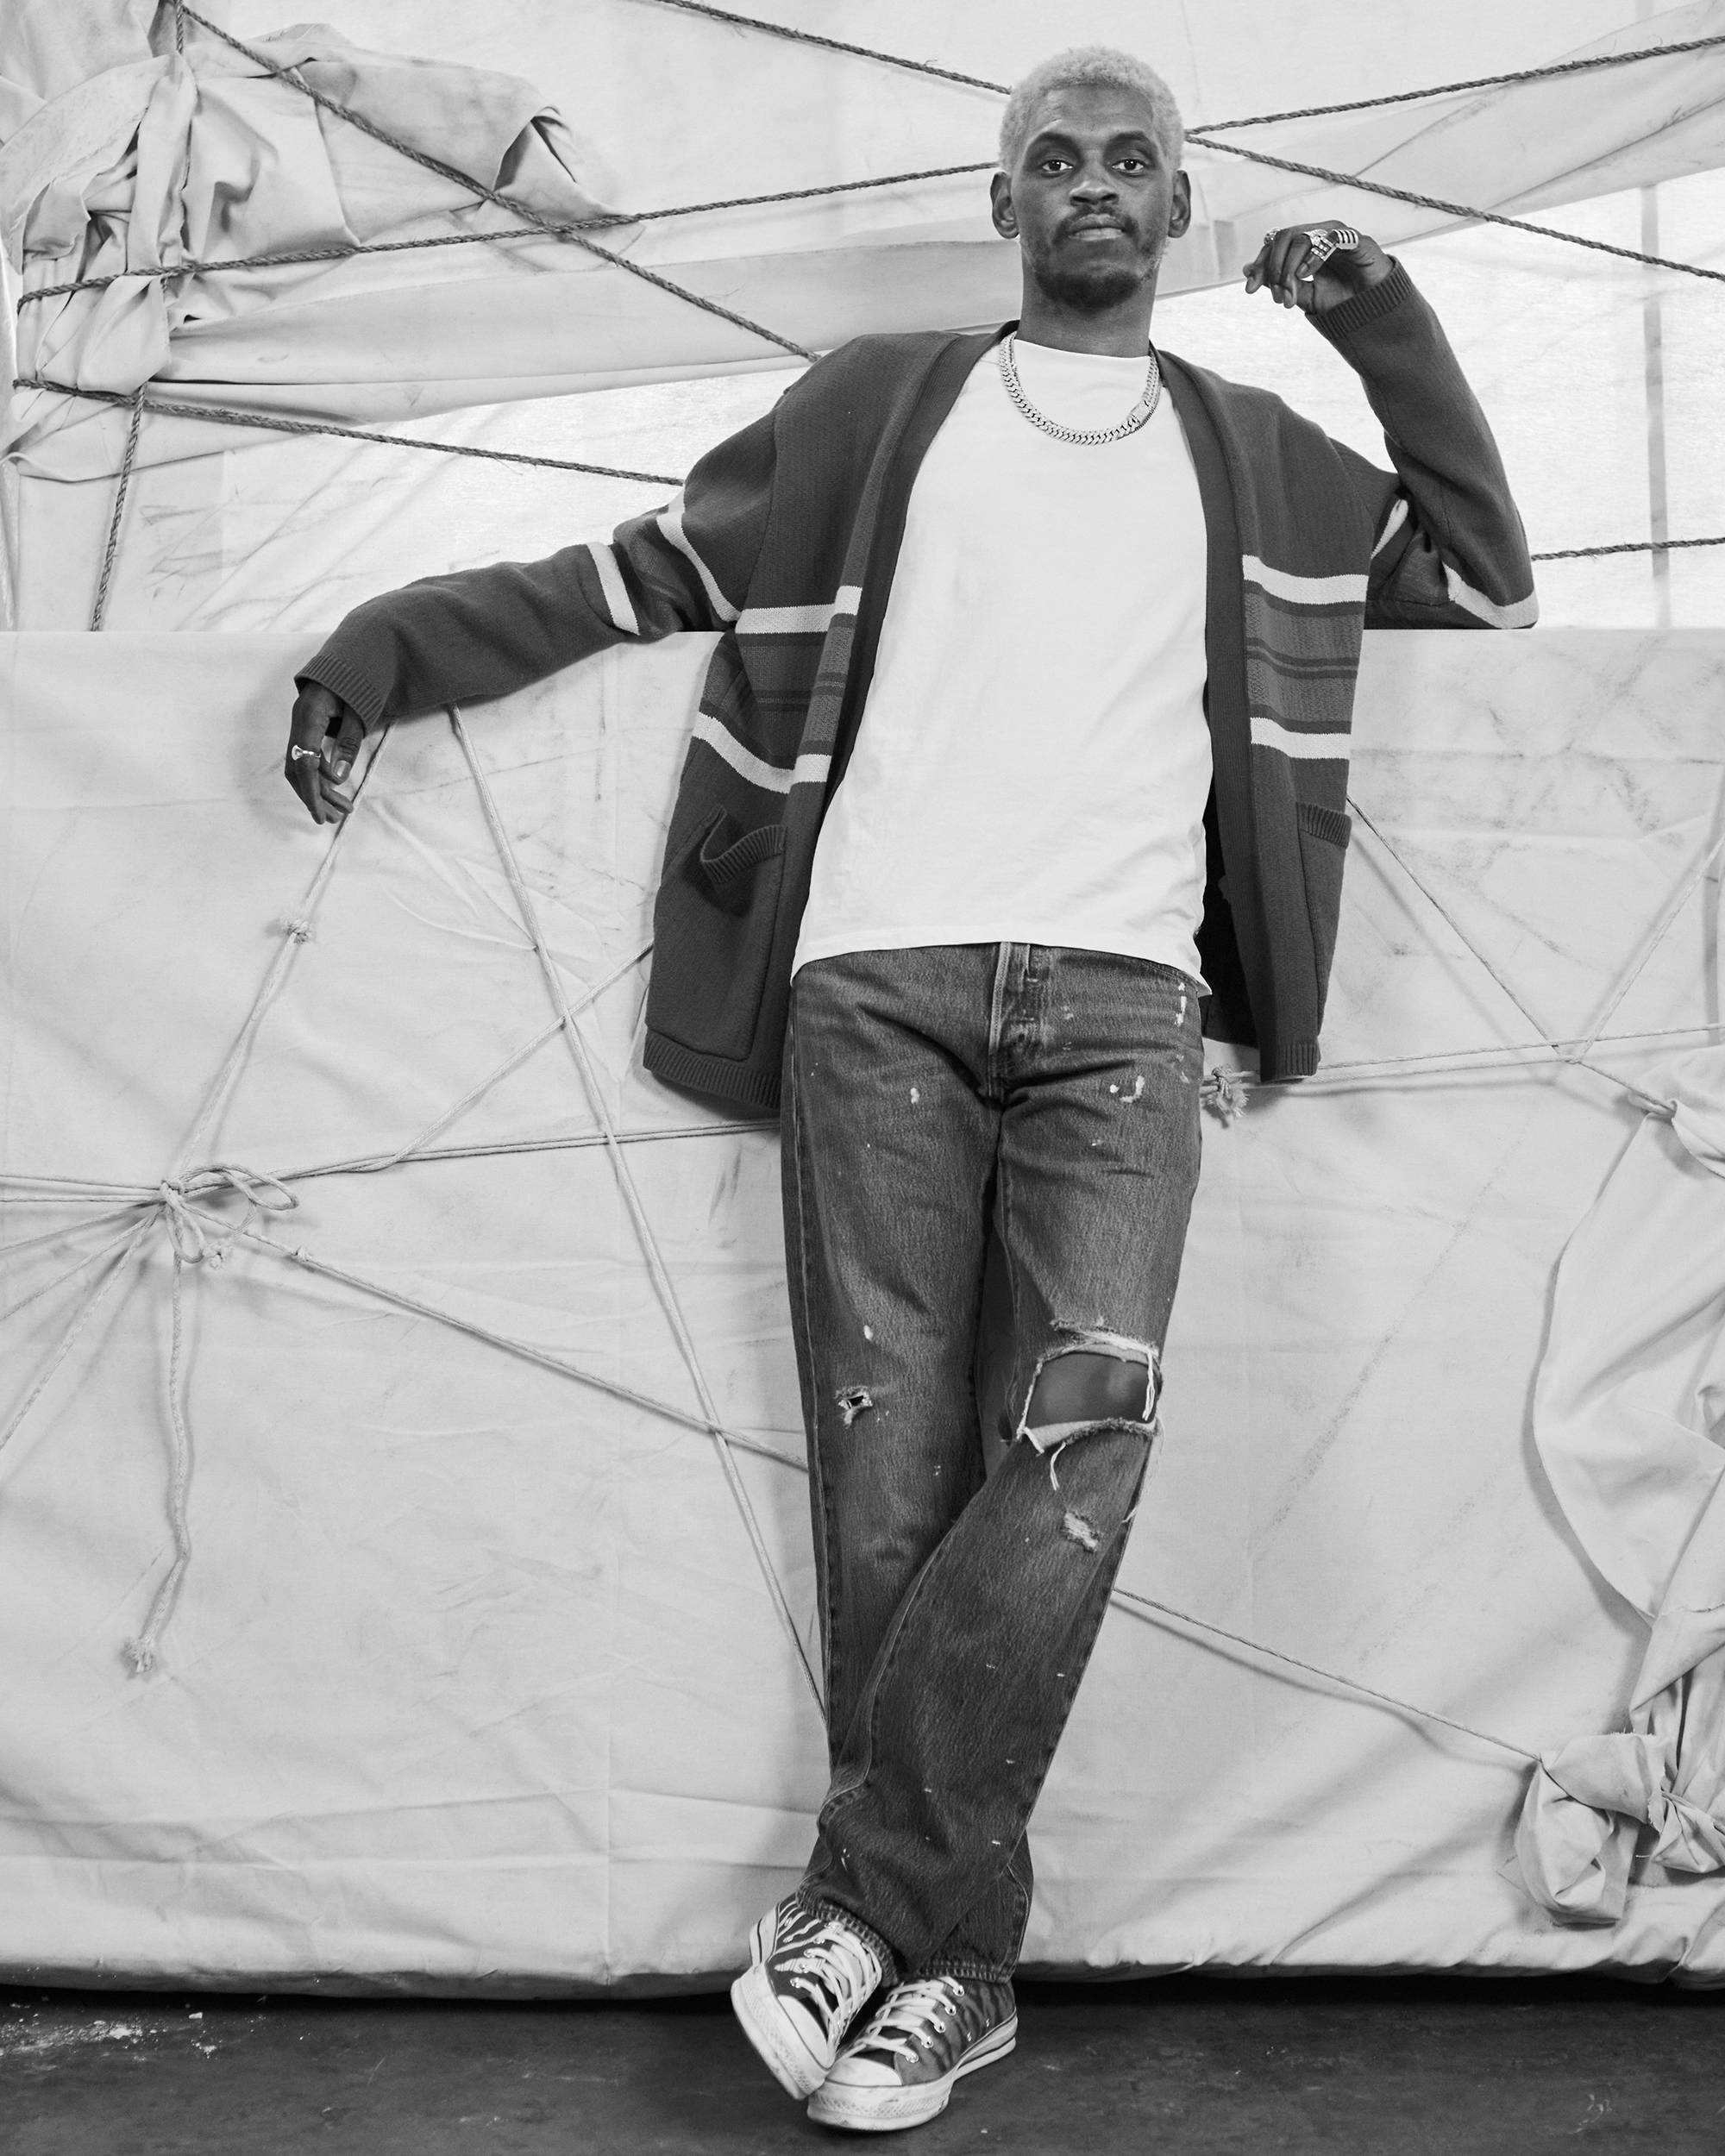 Levis 501 Jeans styled on designer, artist, model and founding member of the legendary A$AP Mob, A$AP Nast. In a black and white image.